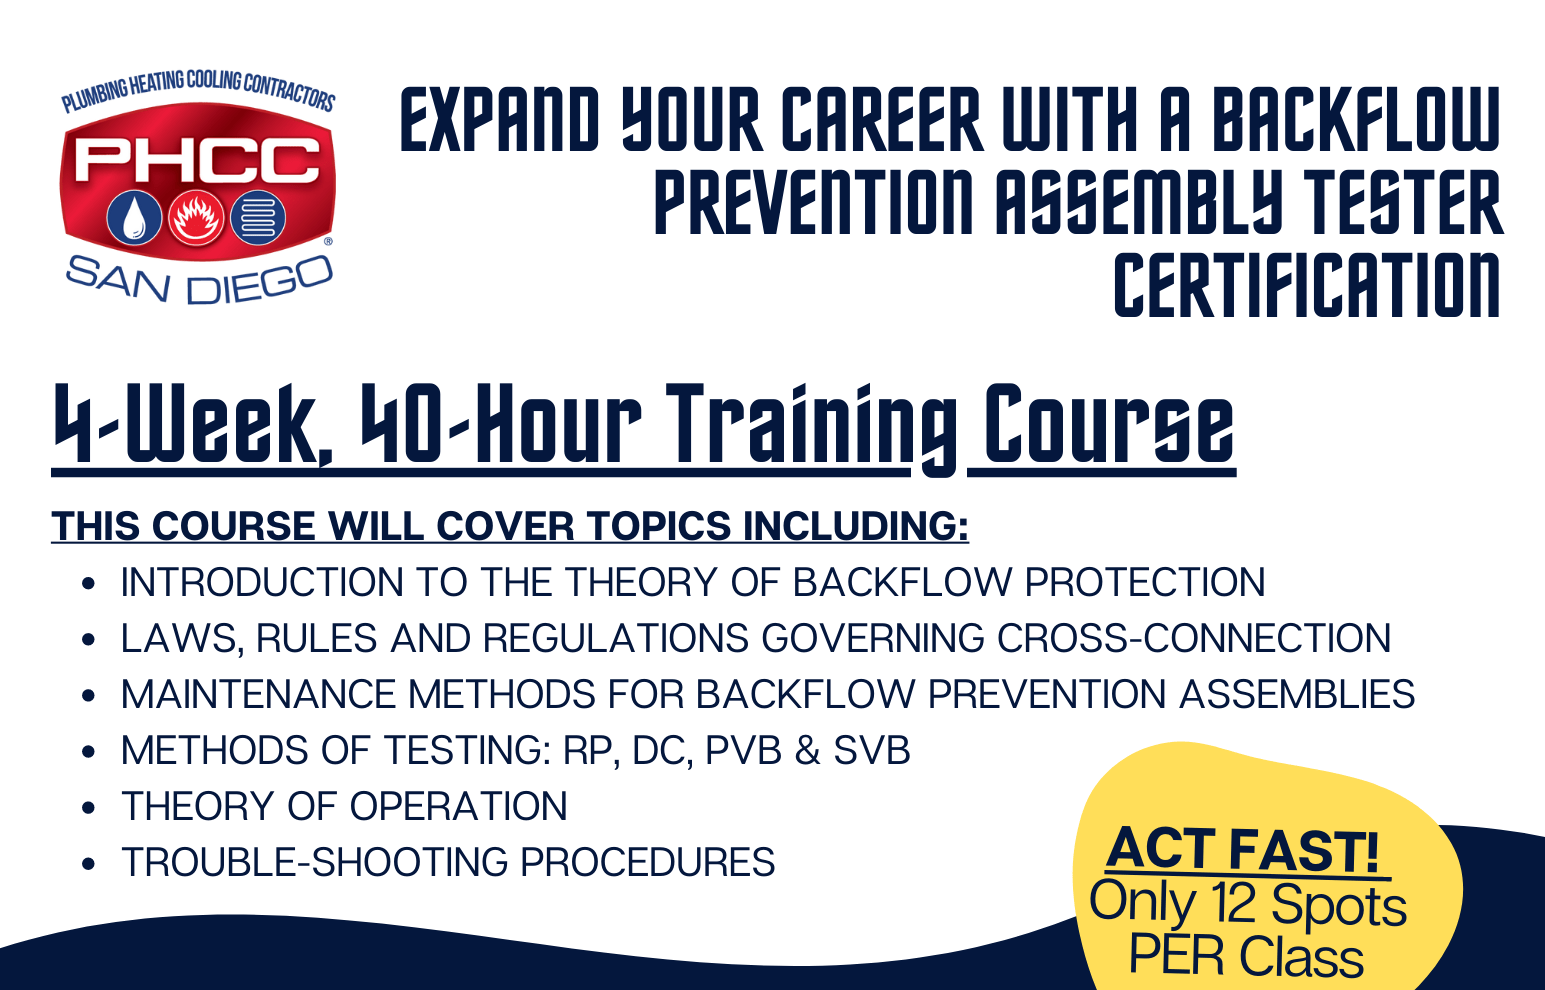 Backflow Prevention Assembly Tester Certification Course 6 week 40